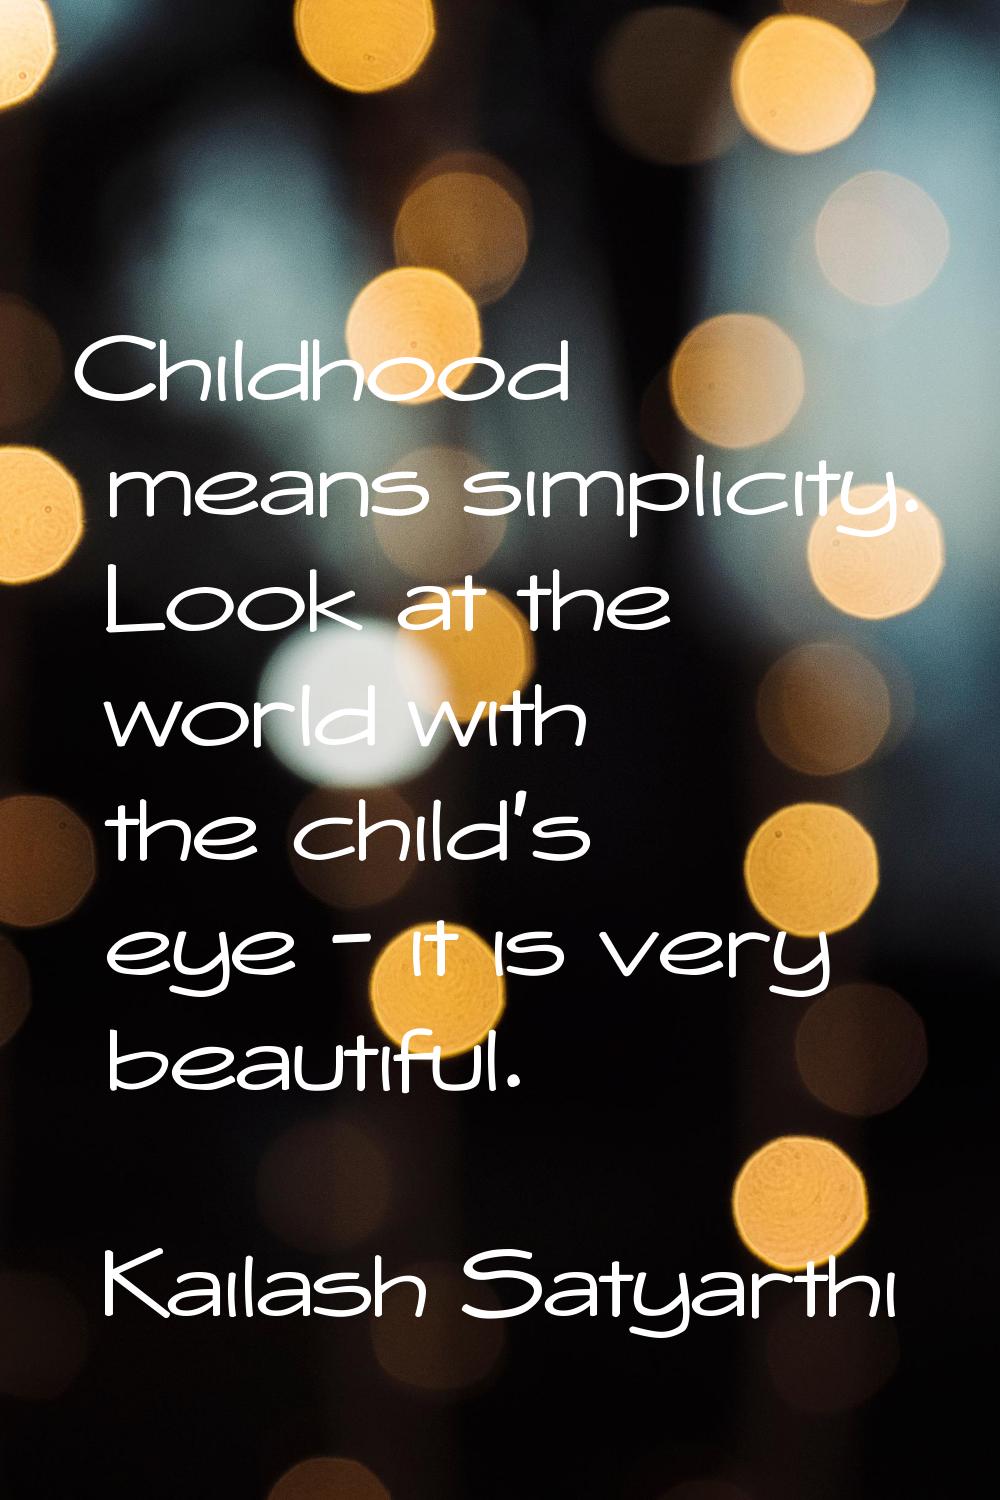 Childhood means simplicity. Look at the world with the child's eye - it is very beautiful.